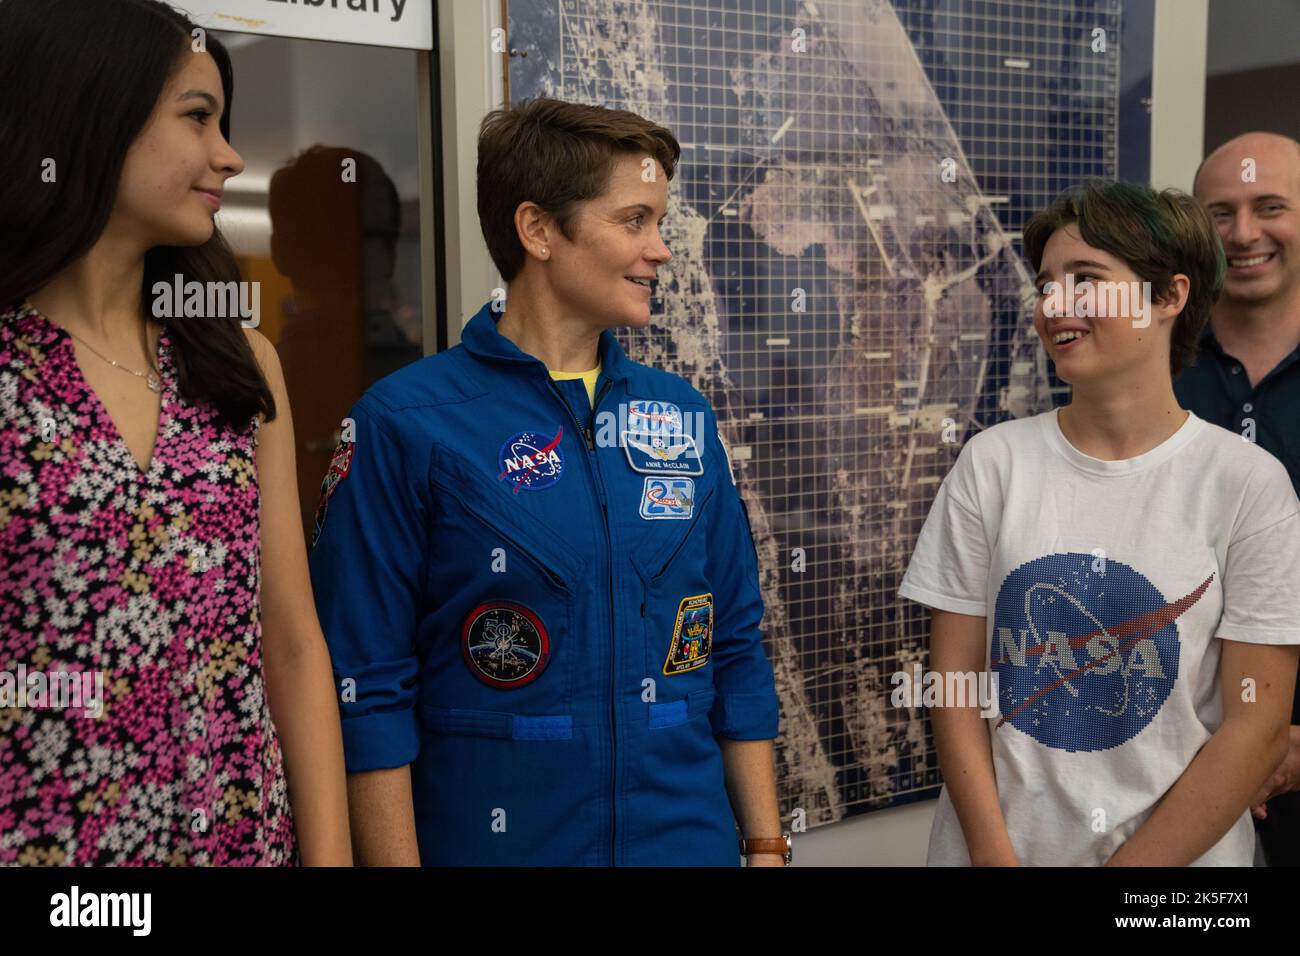 NASA astronaut Anne McClain talks with student essay winners Amanda Gutierrez, left, and Taia Saurer at the agency’s news center at Kennedy Space Center in Florida on Sept. 2, 2022. Gutierrez and Saurer won the Artemis Moon Pod Essay Contest – a nationwide event involving nearly 14,000 students – for their creative visions of a pioneering journey to the Moon. The grand prize was a trip to Kennedy to watch the launch of Artemis I. Gutierrez, 17, is an 11th-grader from Lincoln, Nebraska, while Saurer, 14, is an eighth-grader from Laguna Beach, California. Stock Photo